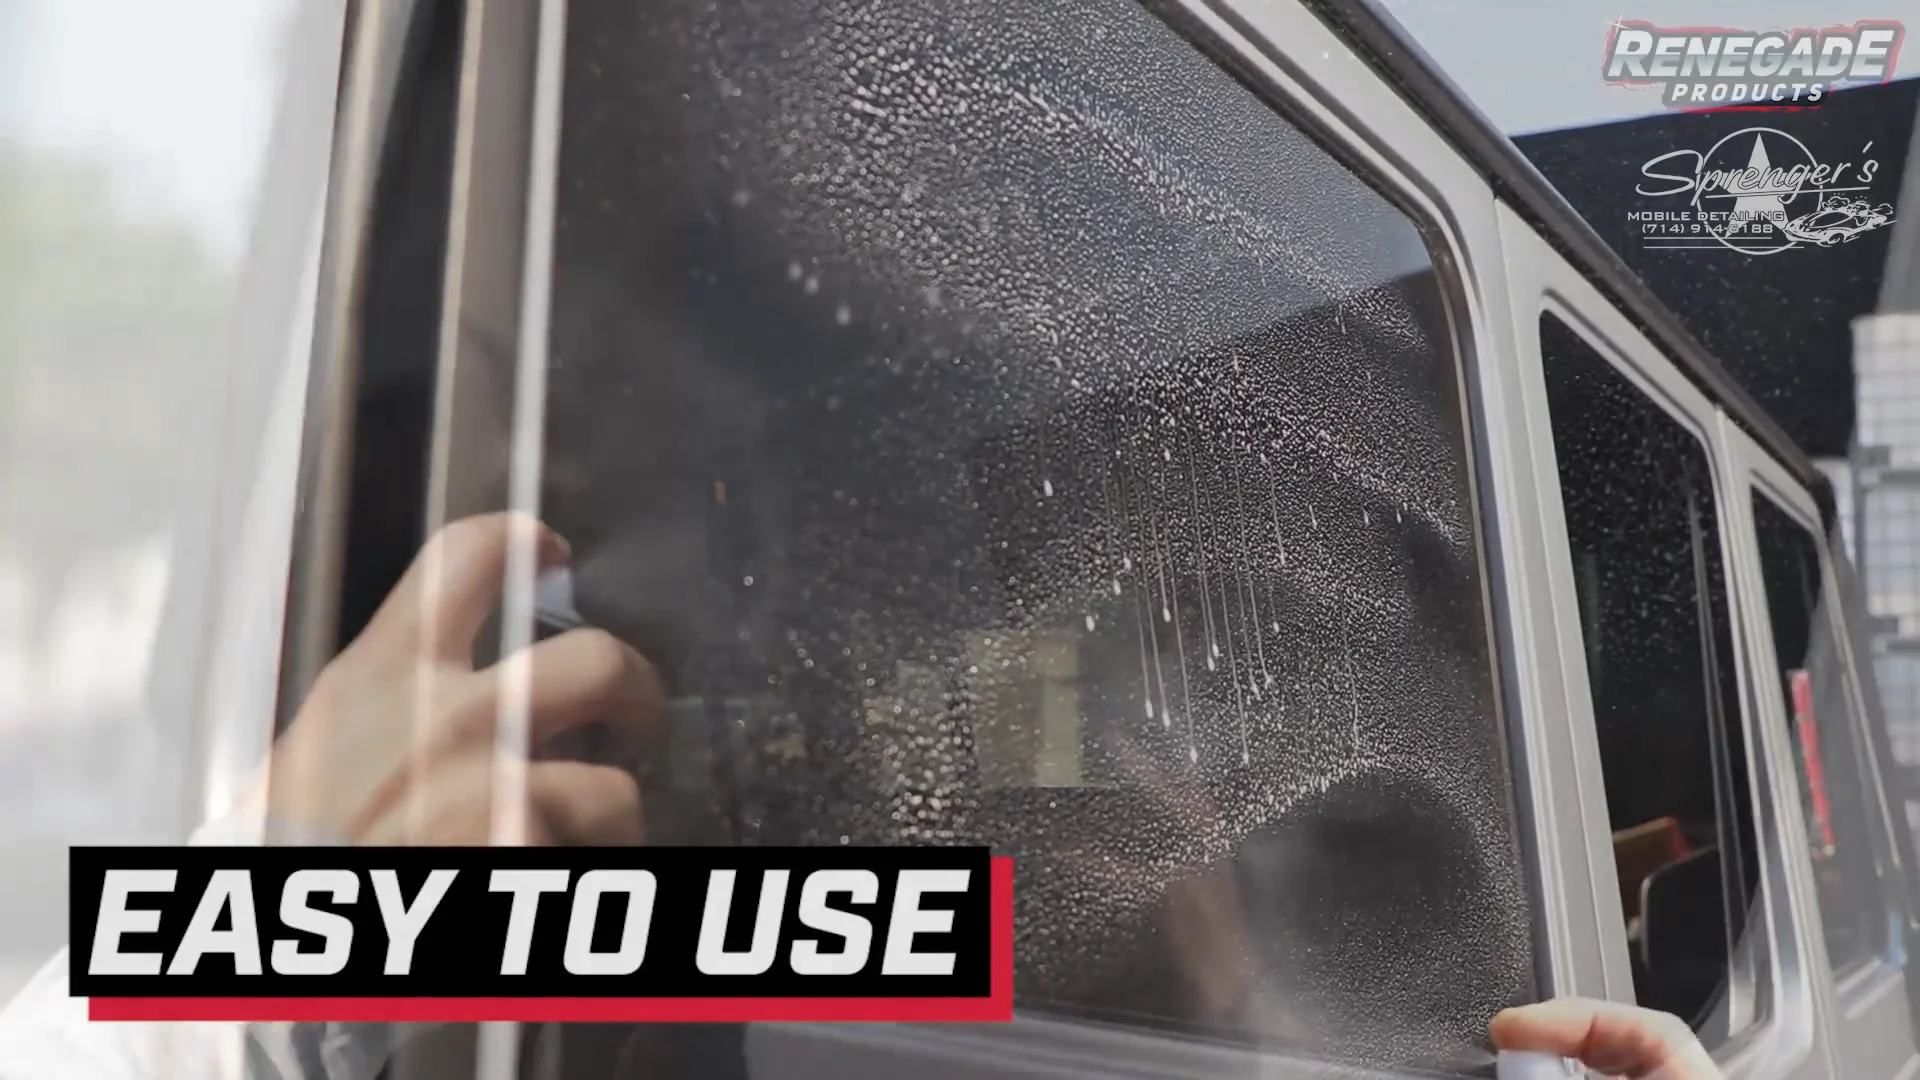 Glass Stripper: How to Deep Clean a Windshield on Vimeo